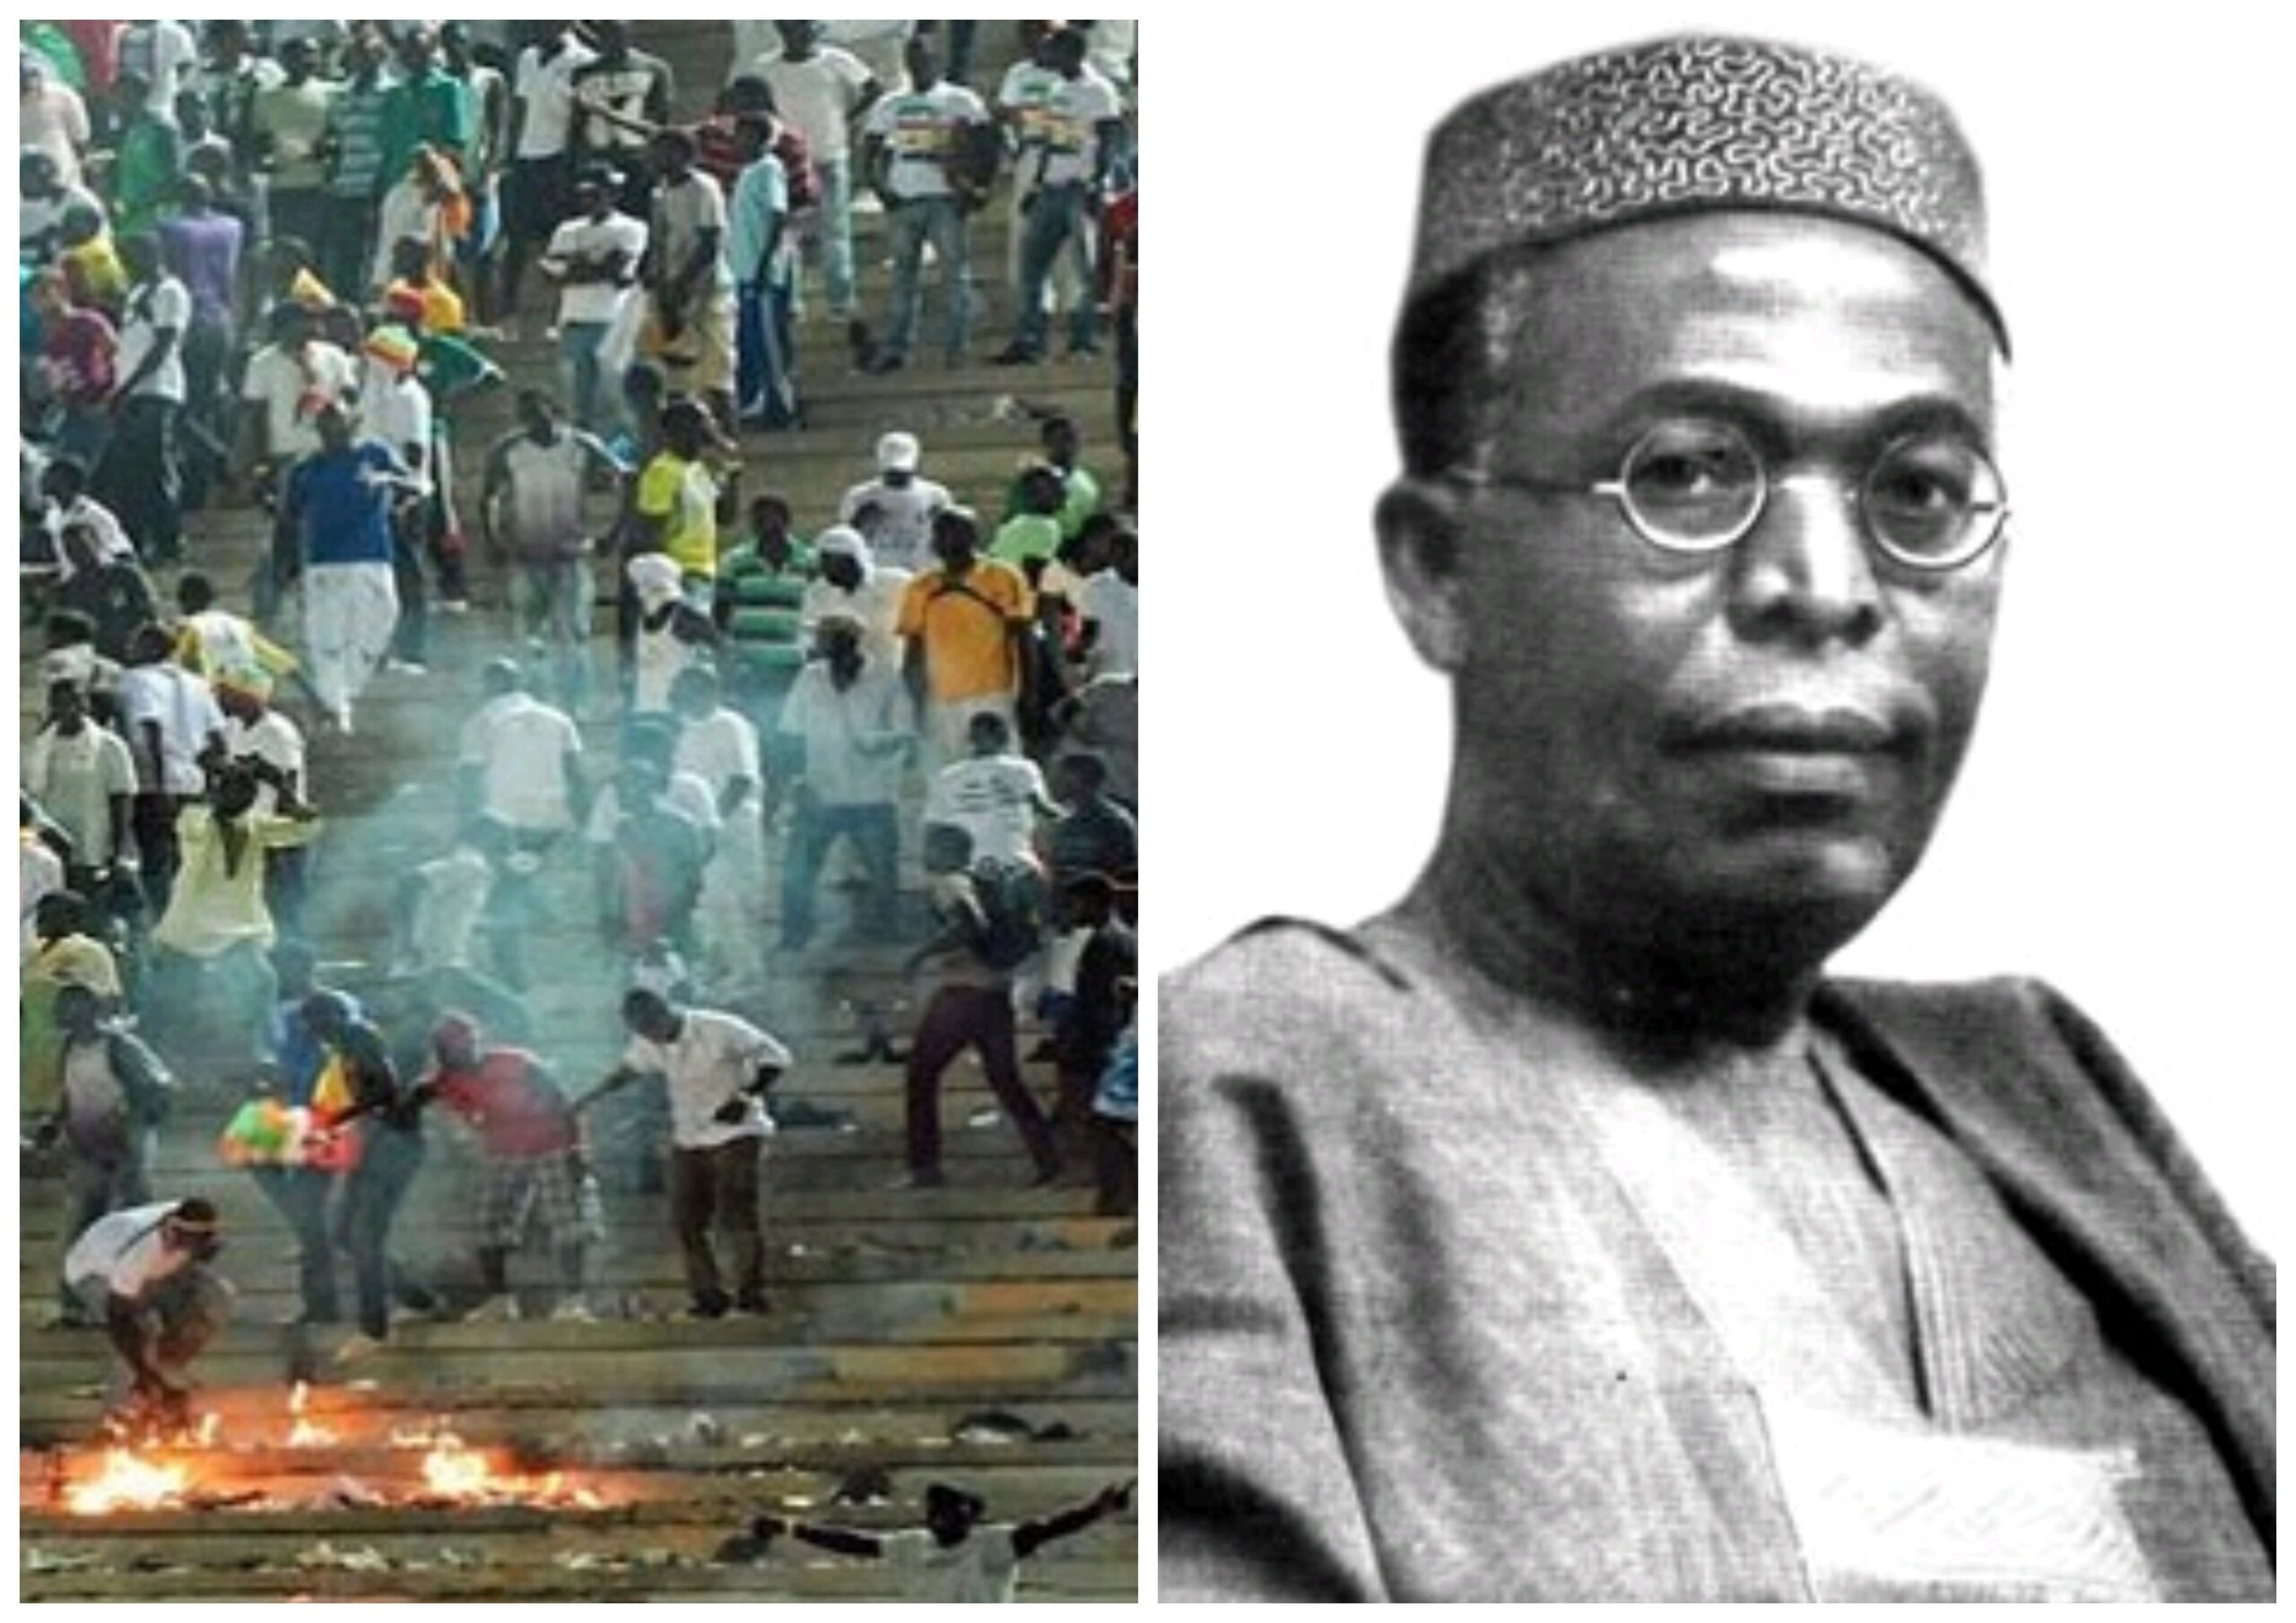 HISTORY BOOK: Obafemi Awolowo Passes Away | Accra Stadium Disaster Claims 126 Ghanaian Football Fans' Lives